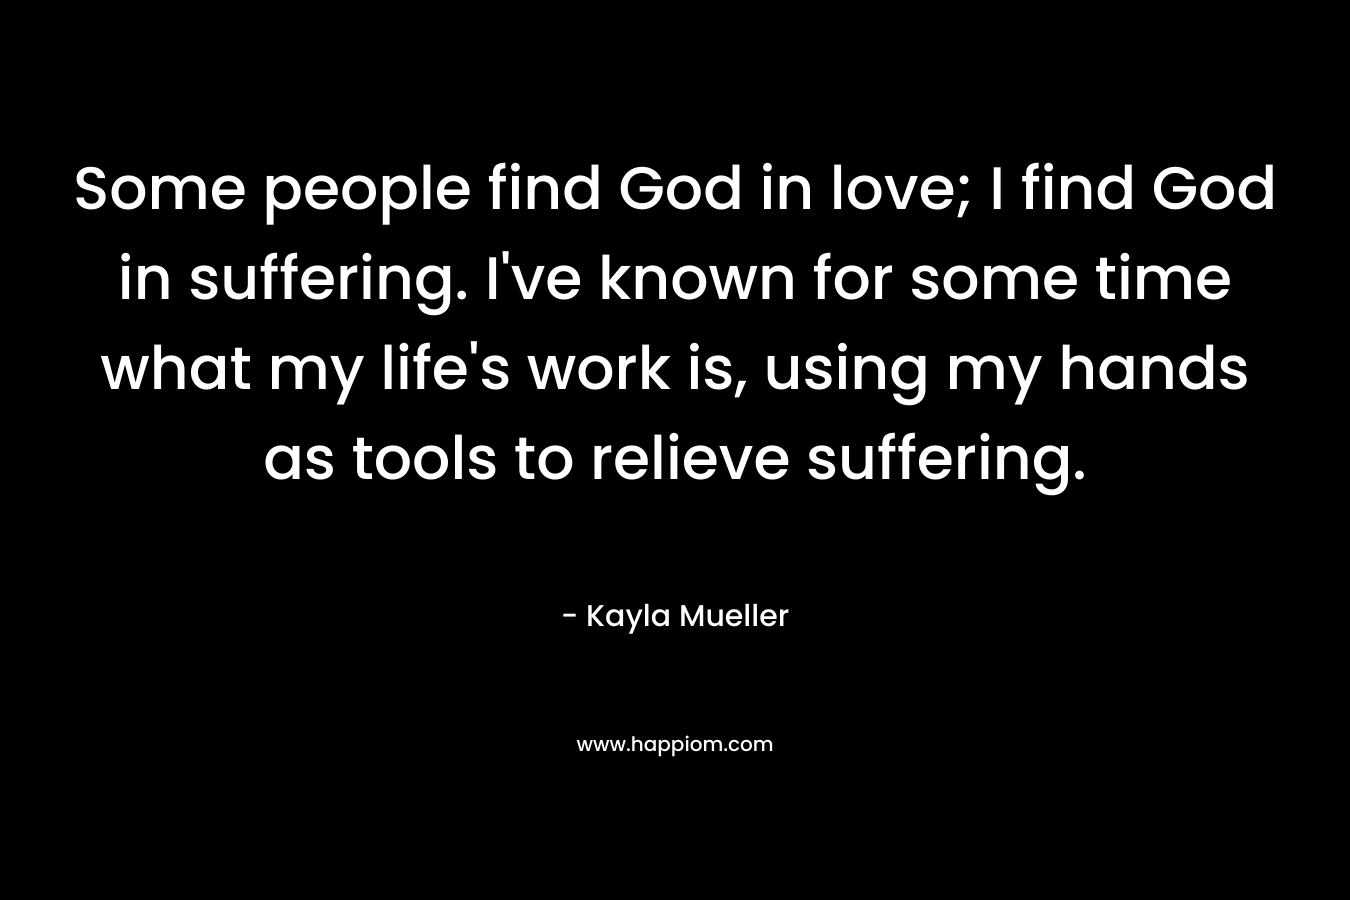 Some people find God in love; I find God in suffering. I've known for some time what my life's work is, using my hands as tools to relieve suffering.